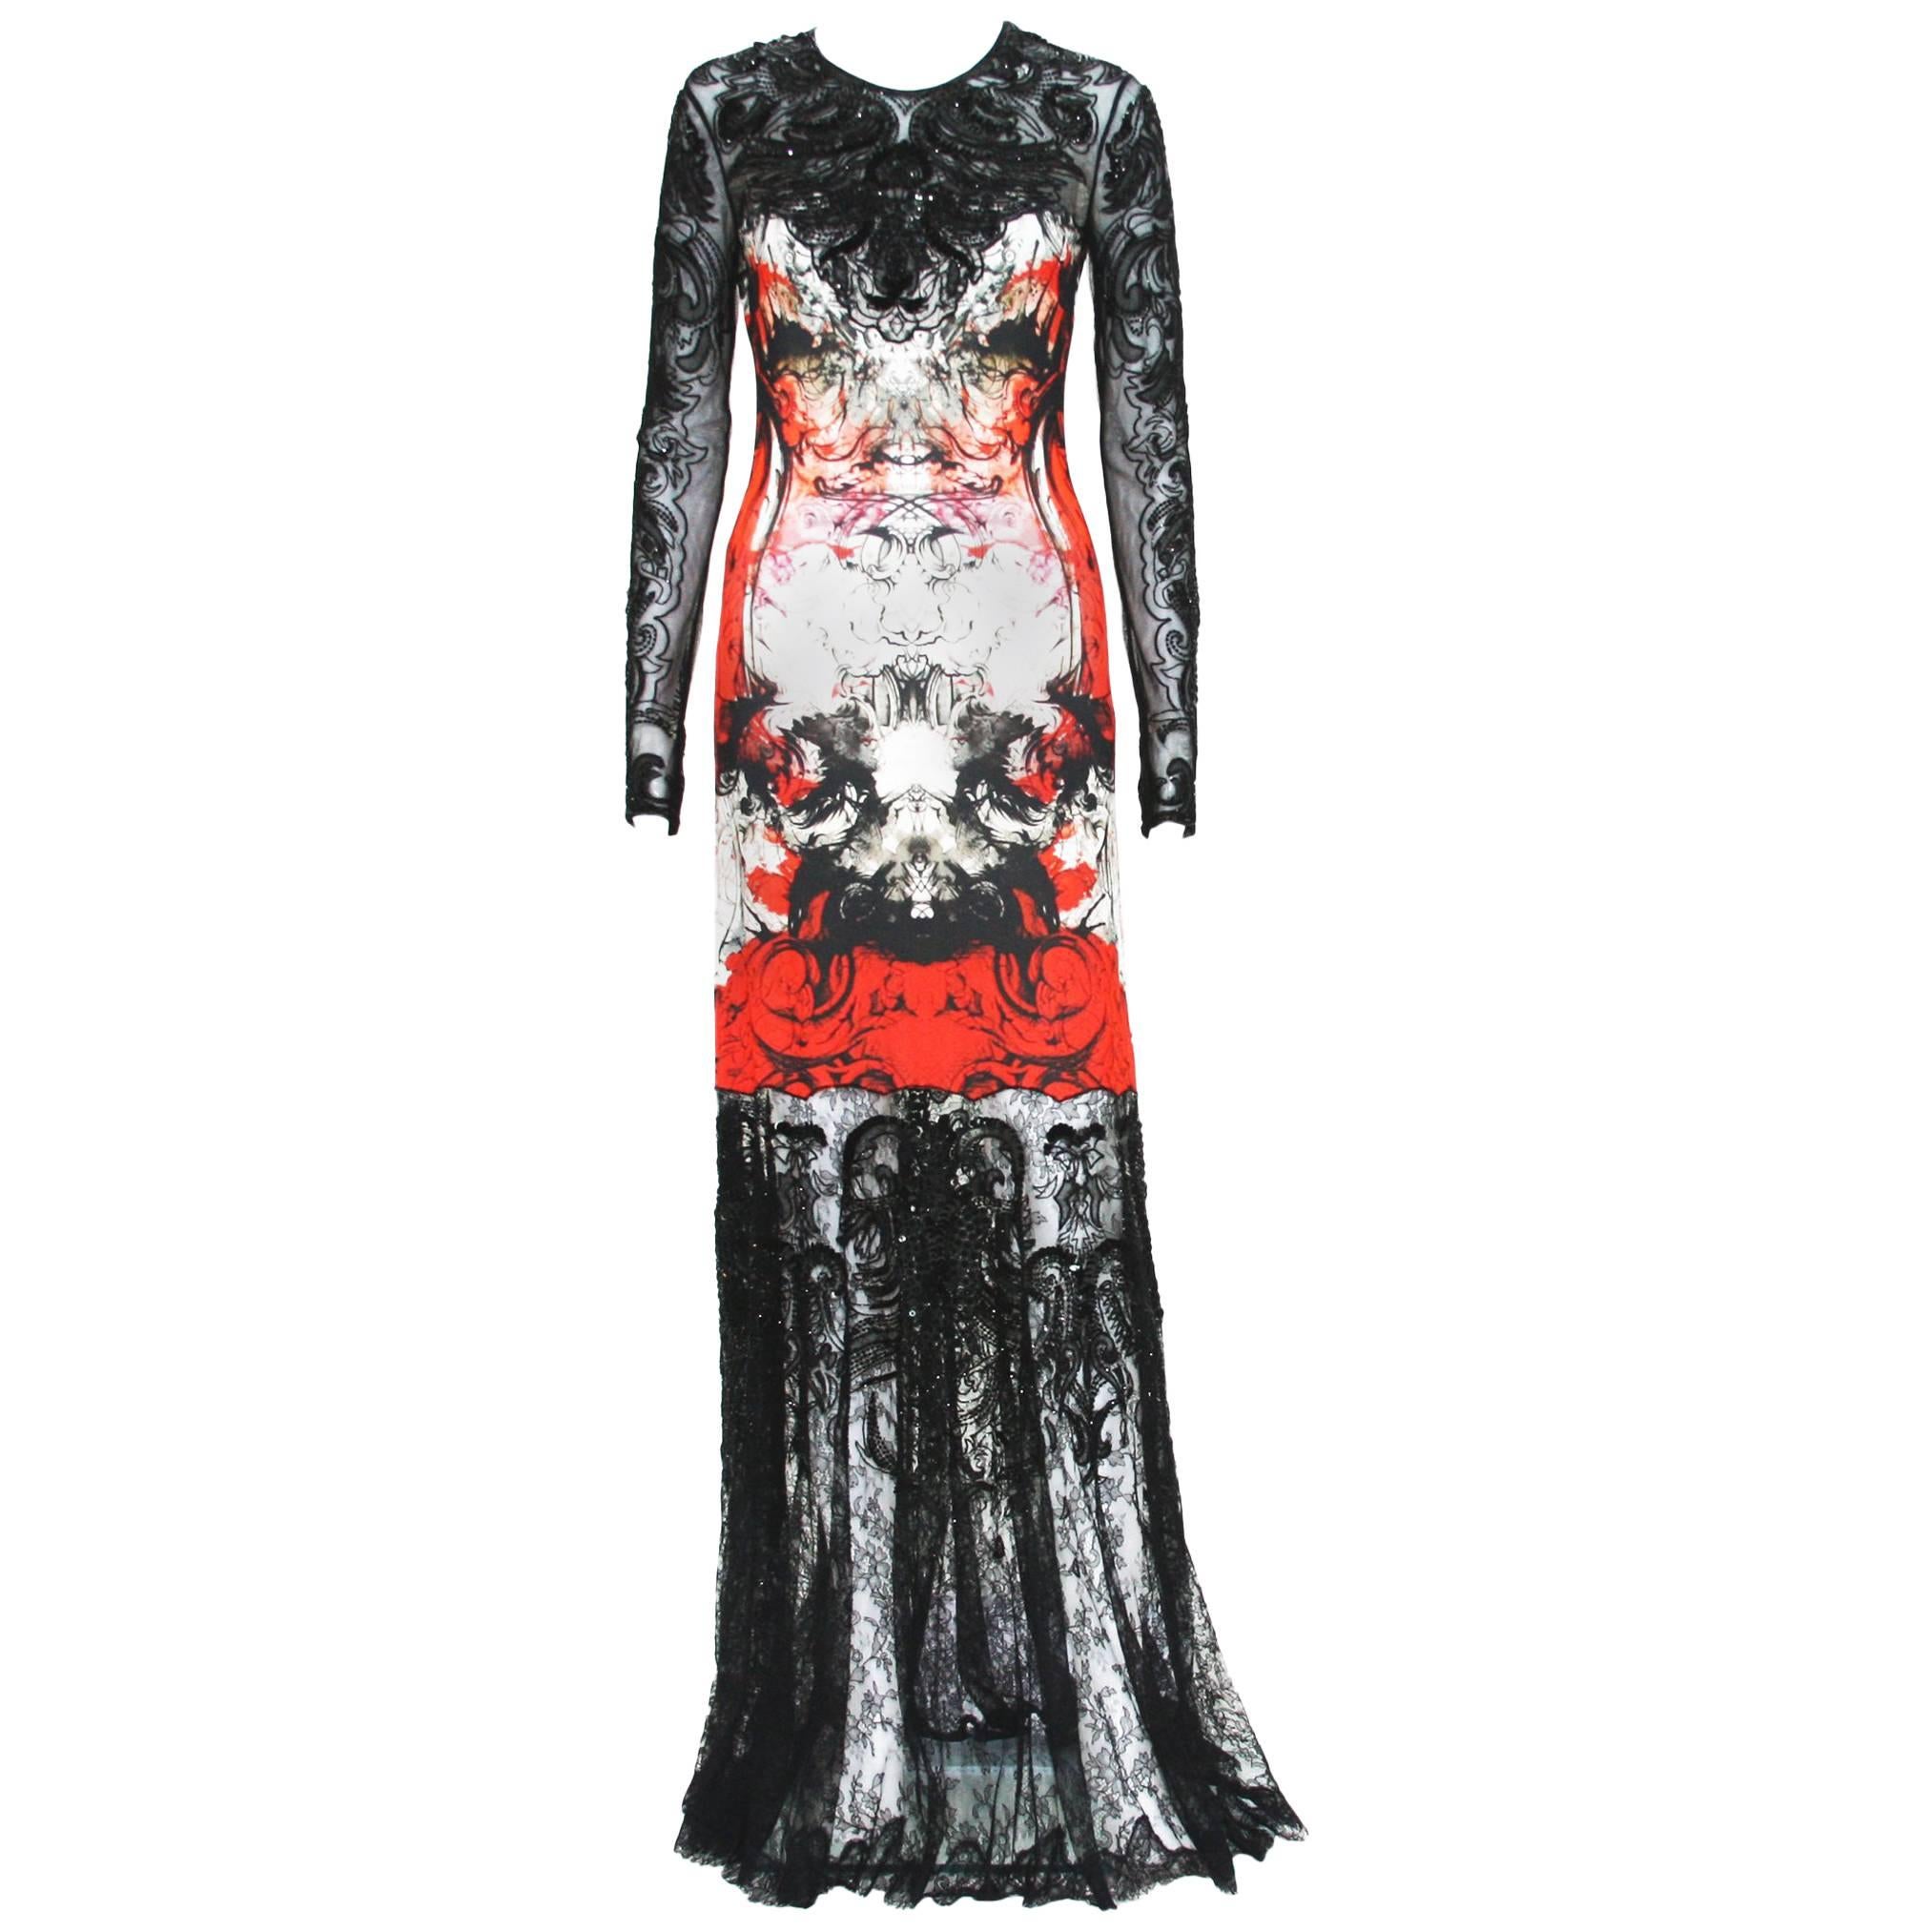 New Roberto Cavalli Lace Fully Beaded Stretch Long Dress Gown IT. 42